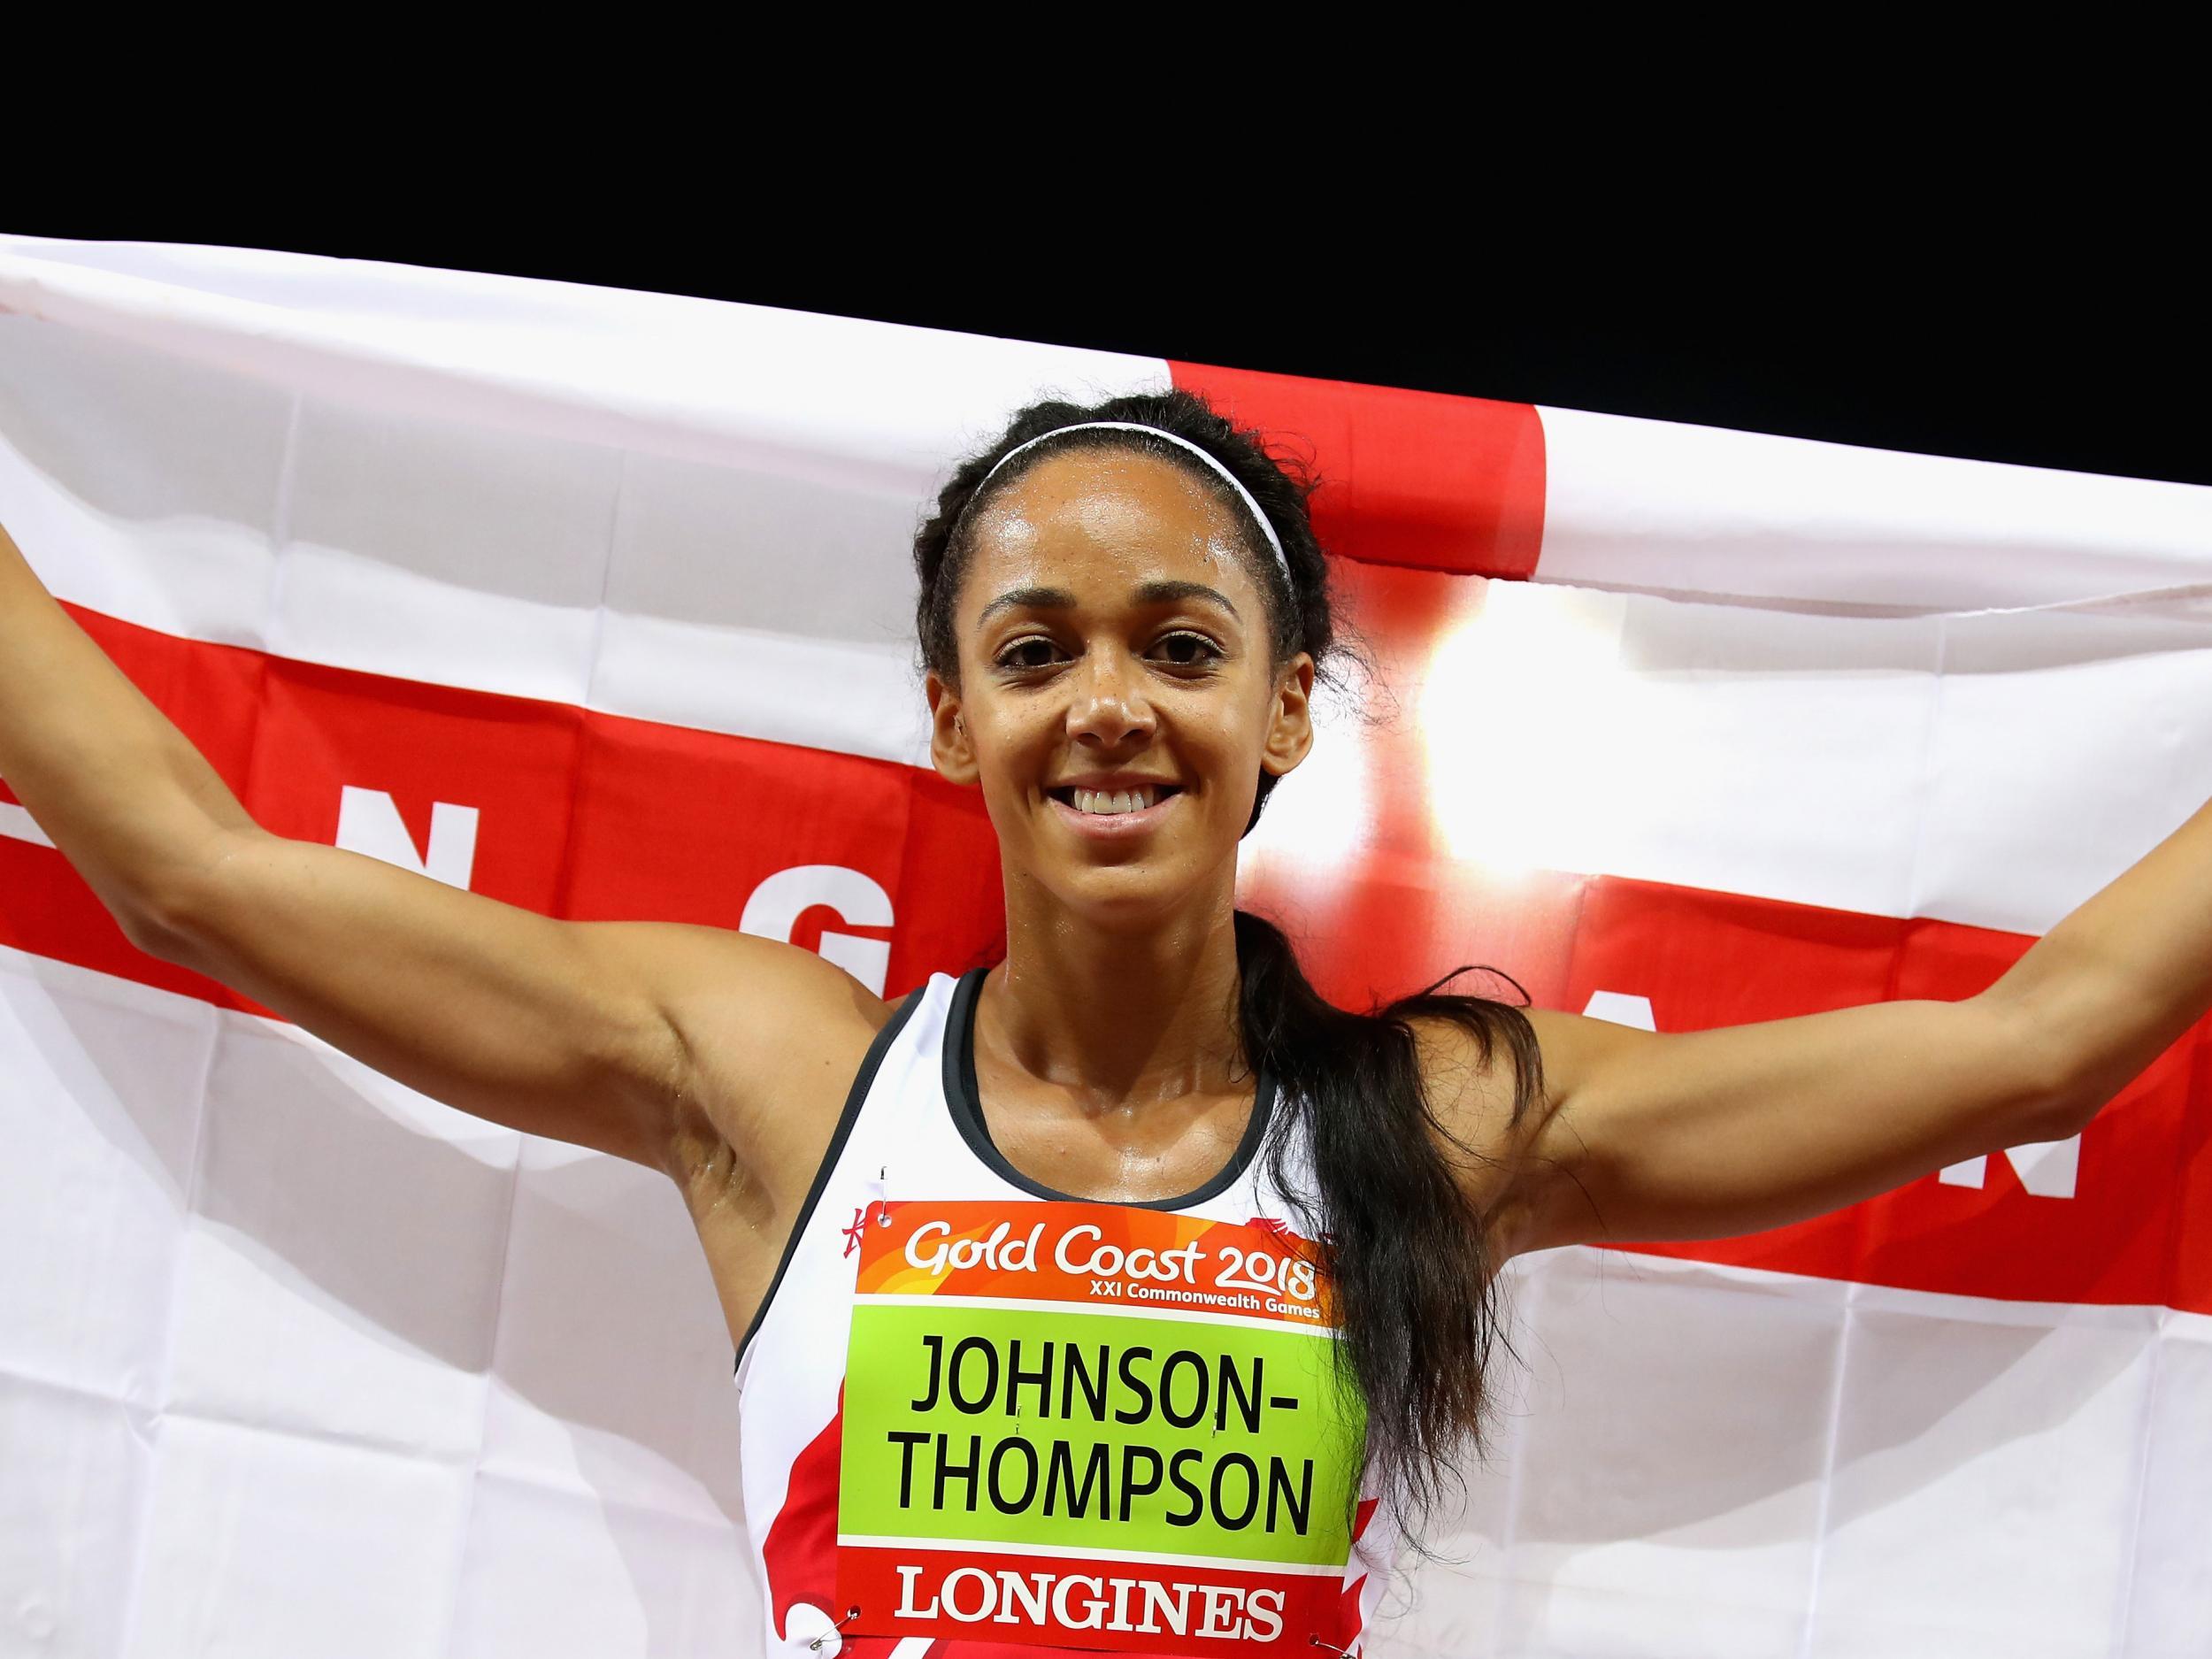 Johnson-Thompson won gold at this year's Commonwealth Games